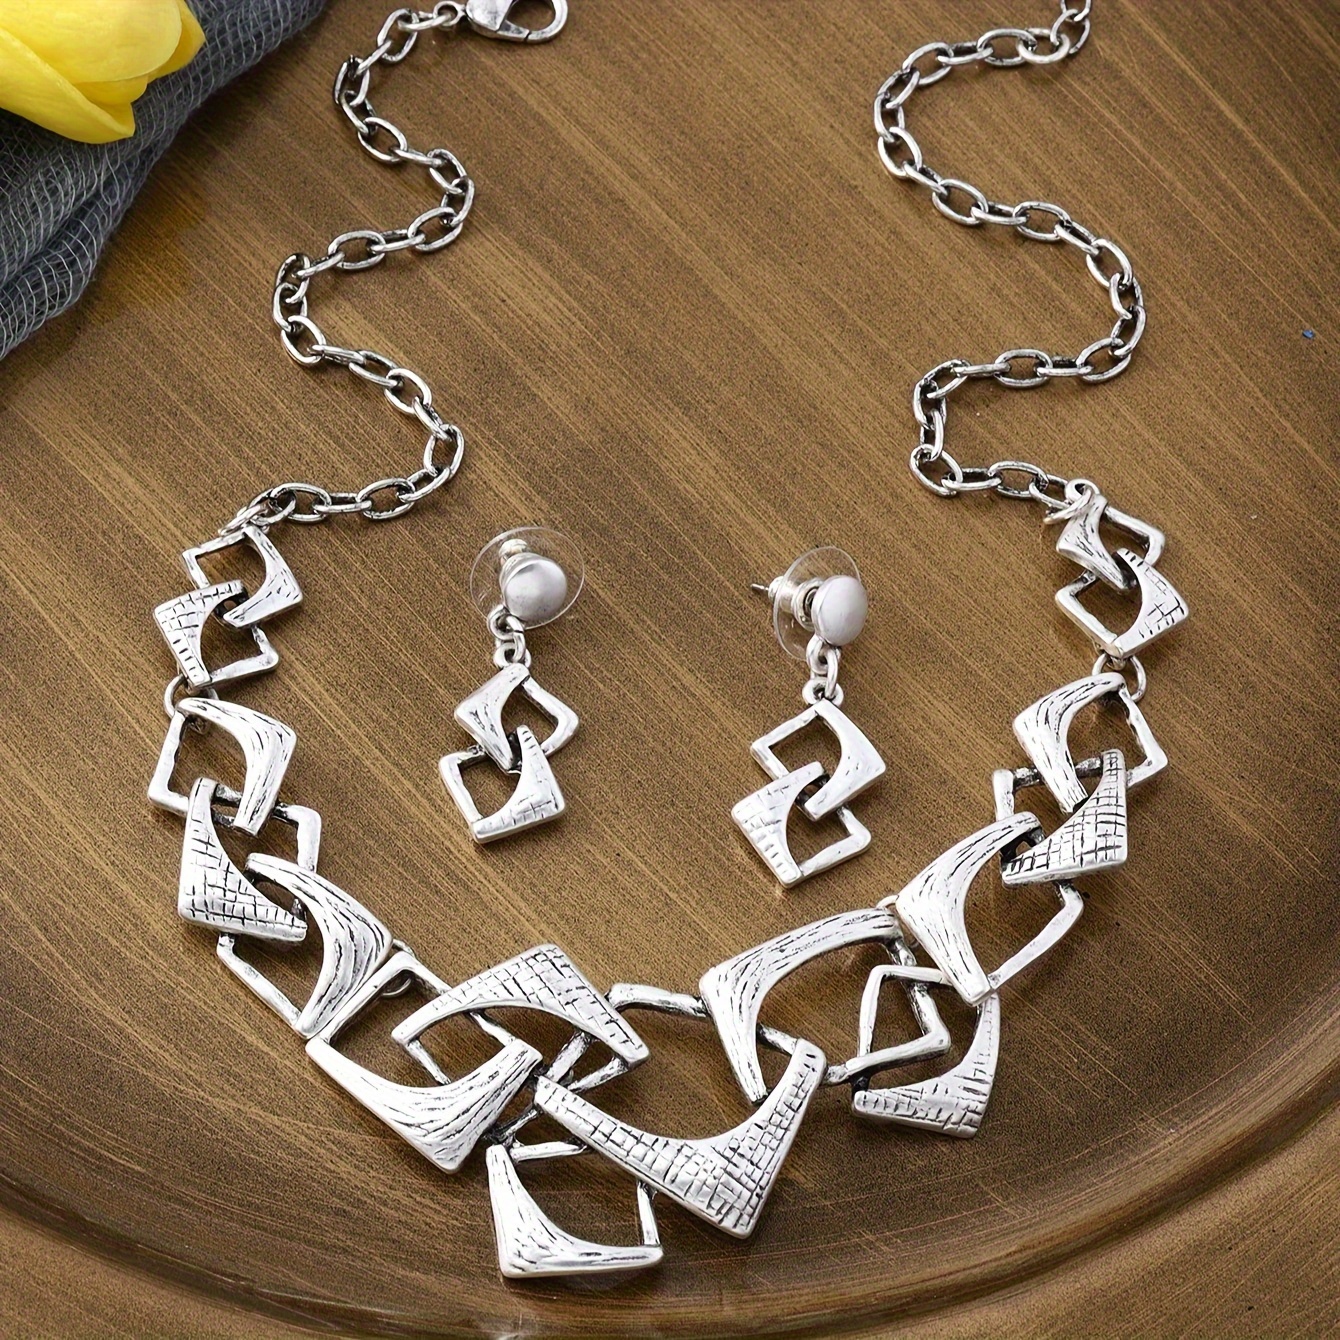 

1 Pair Of Dangle Earrings + 1 Pc Necklace Zinc Alloy Jewelry Set With Unique Geometric Square Design Vintage Punk Style Gift For Women